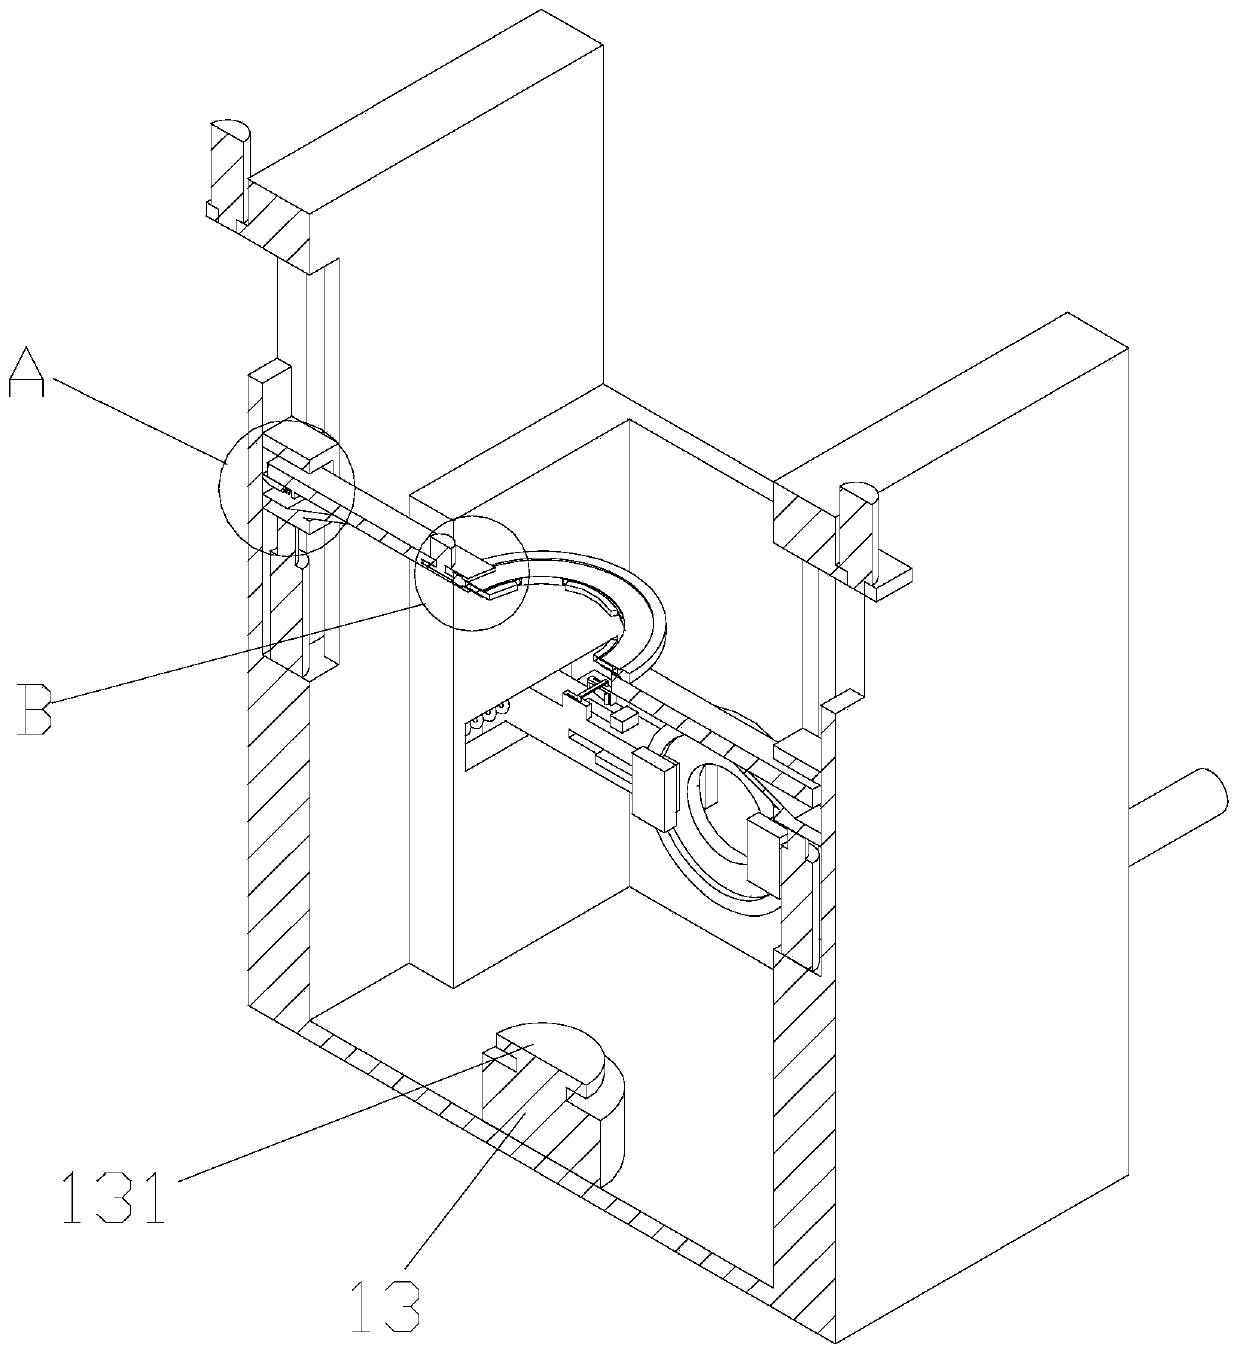 Valve body cleaning device